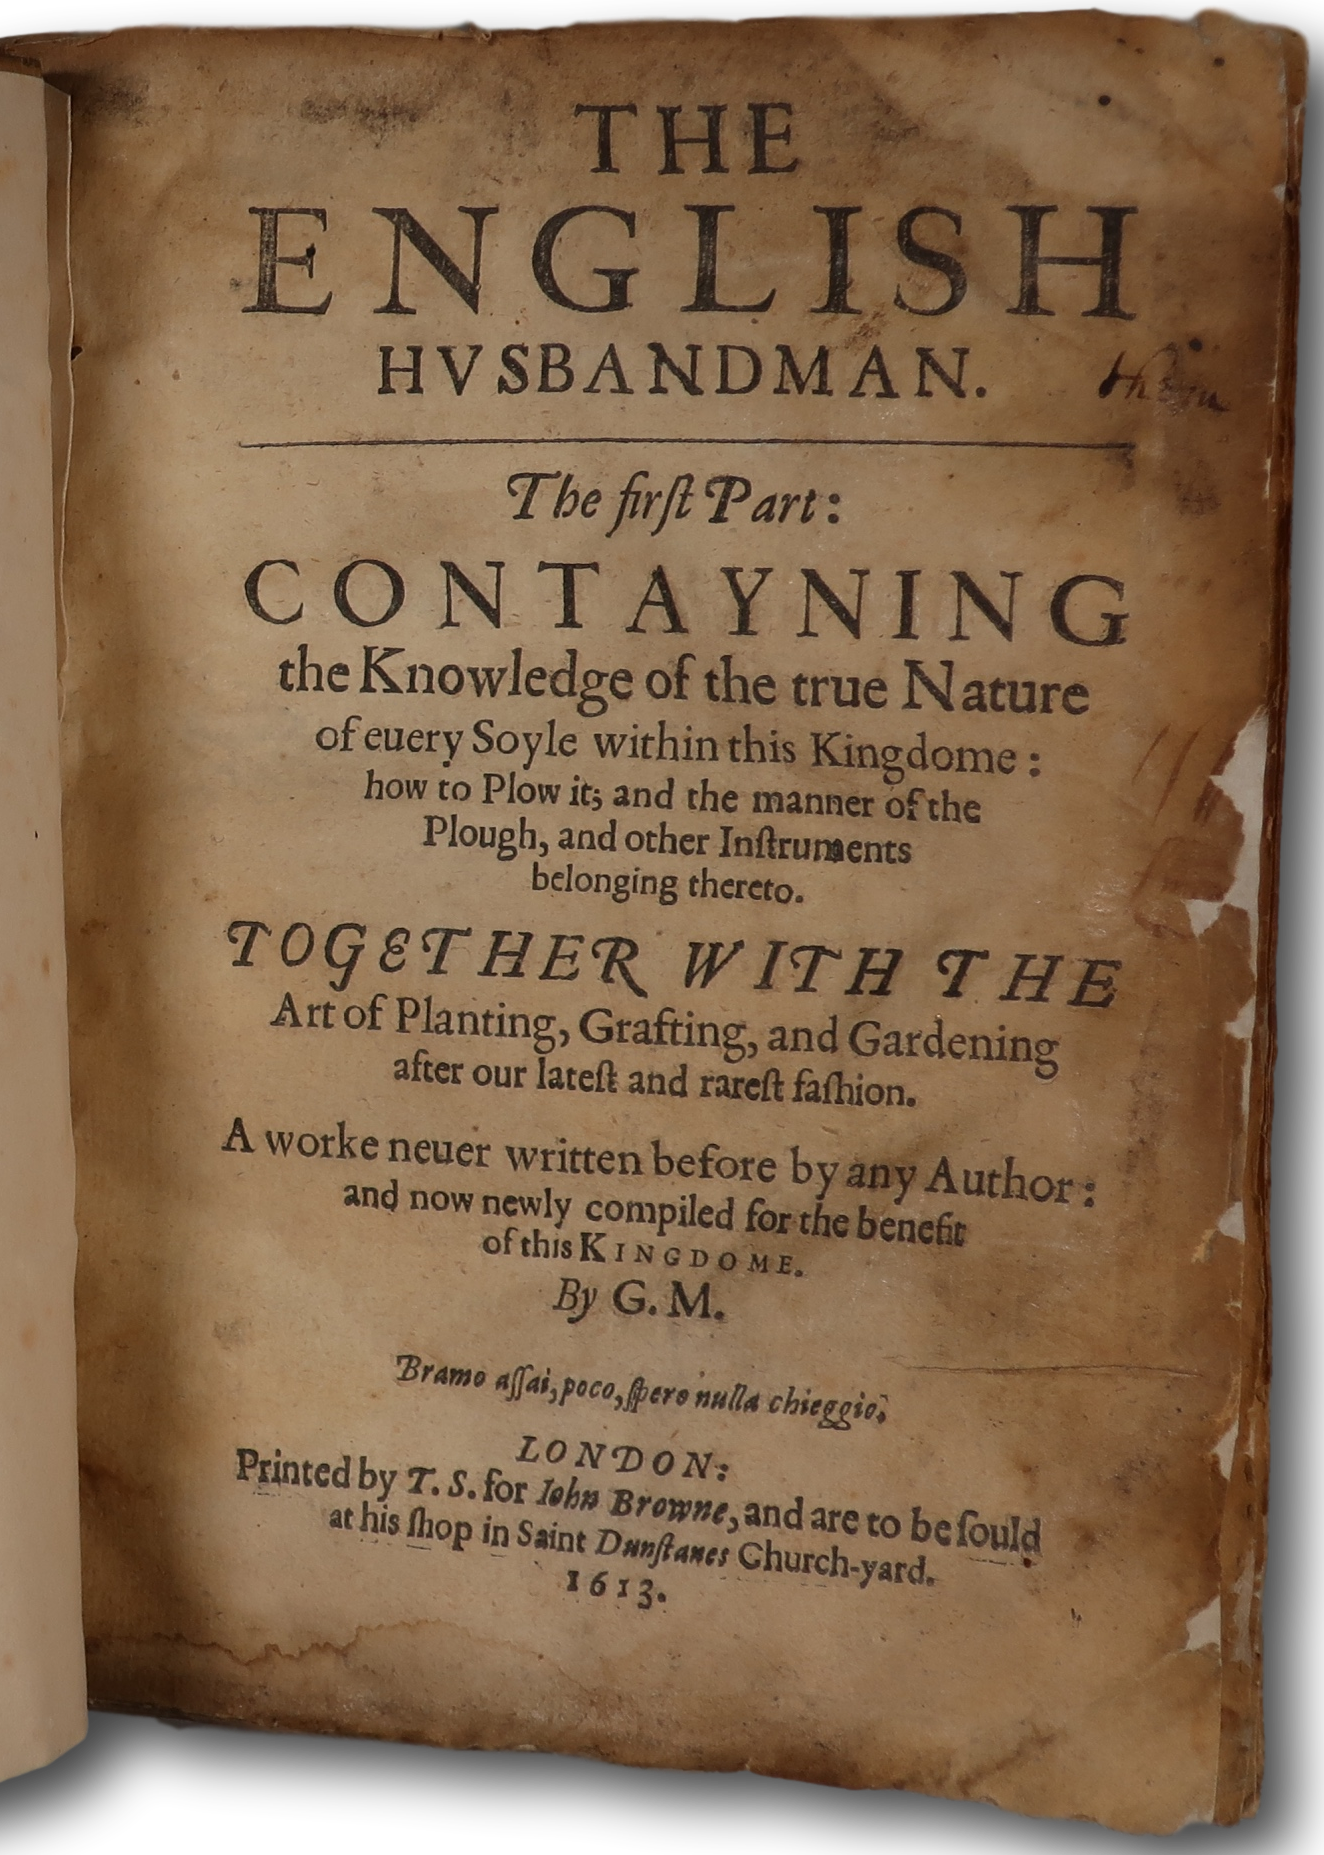 The English Husbandman. The first Part: Contayning the Knowledge of